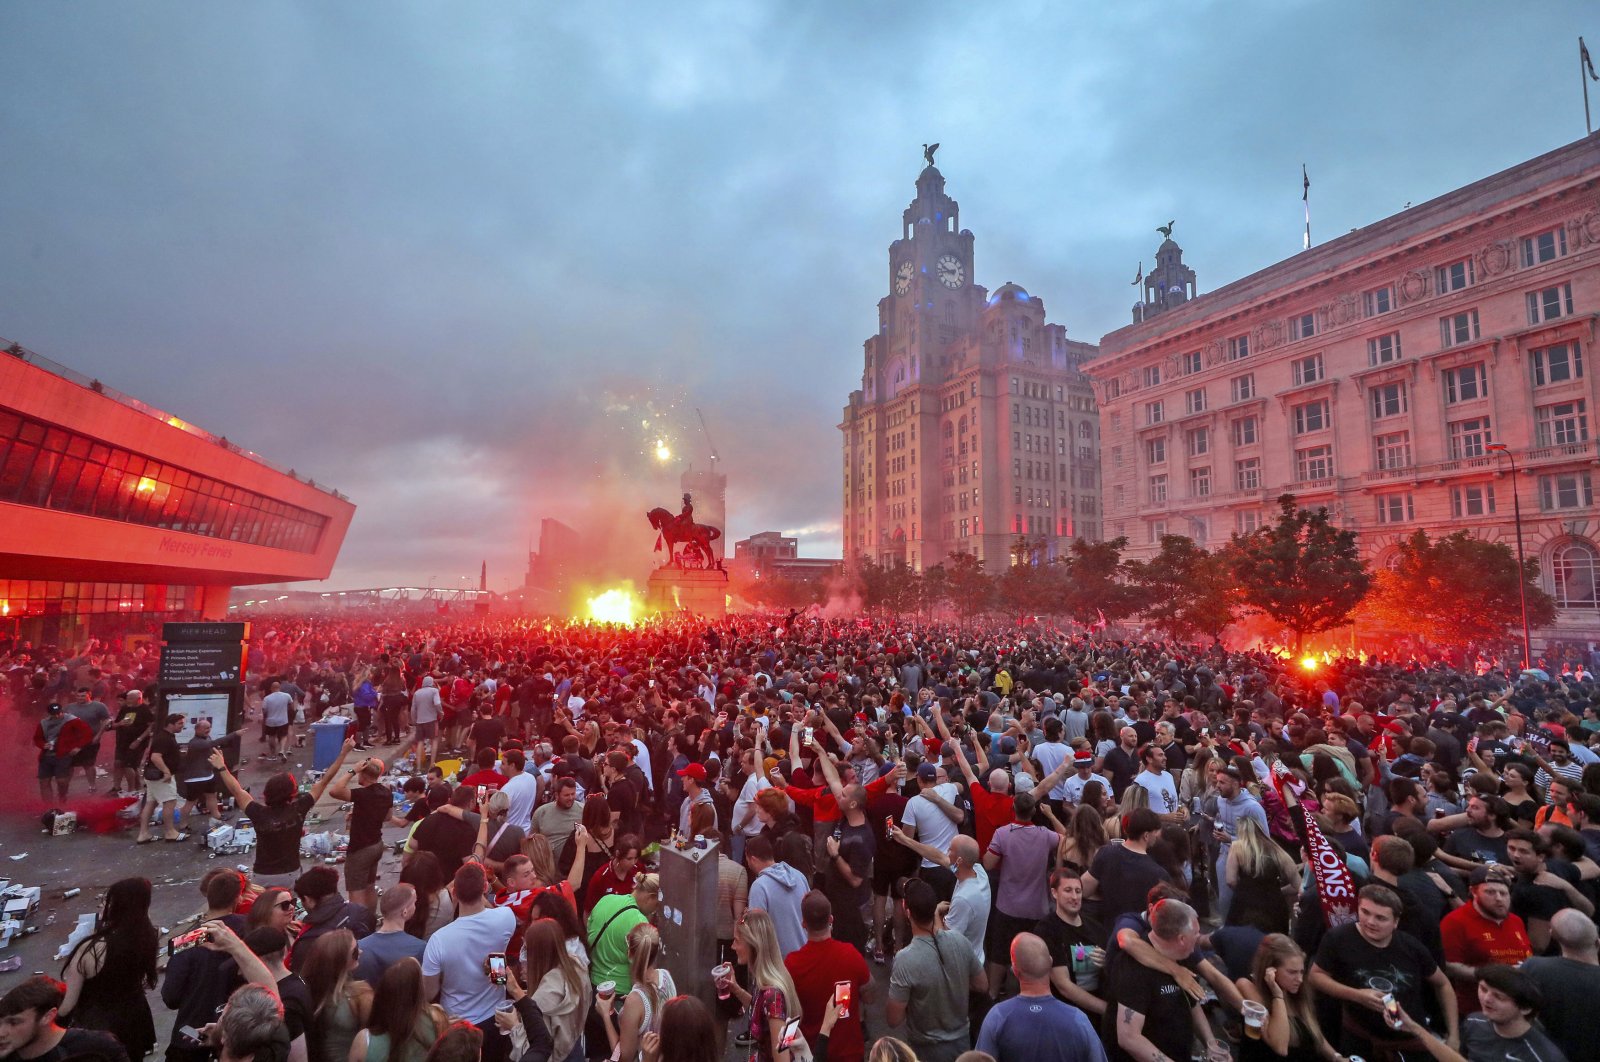 Liverpool fans let off flares outside the Liver Building in Liverpool, June 26, 2020. (AP Photo)